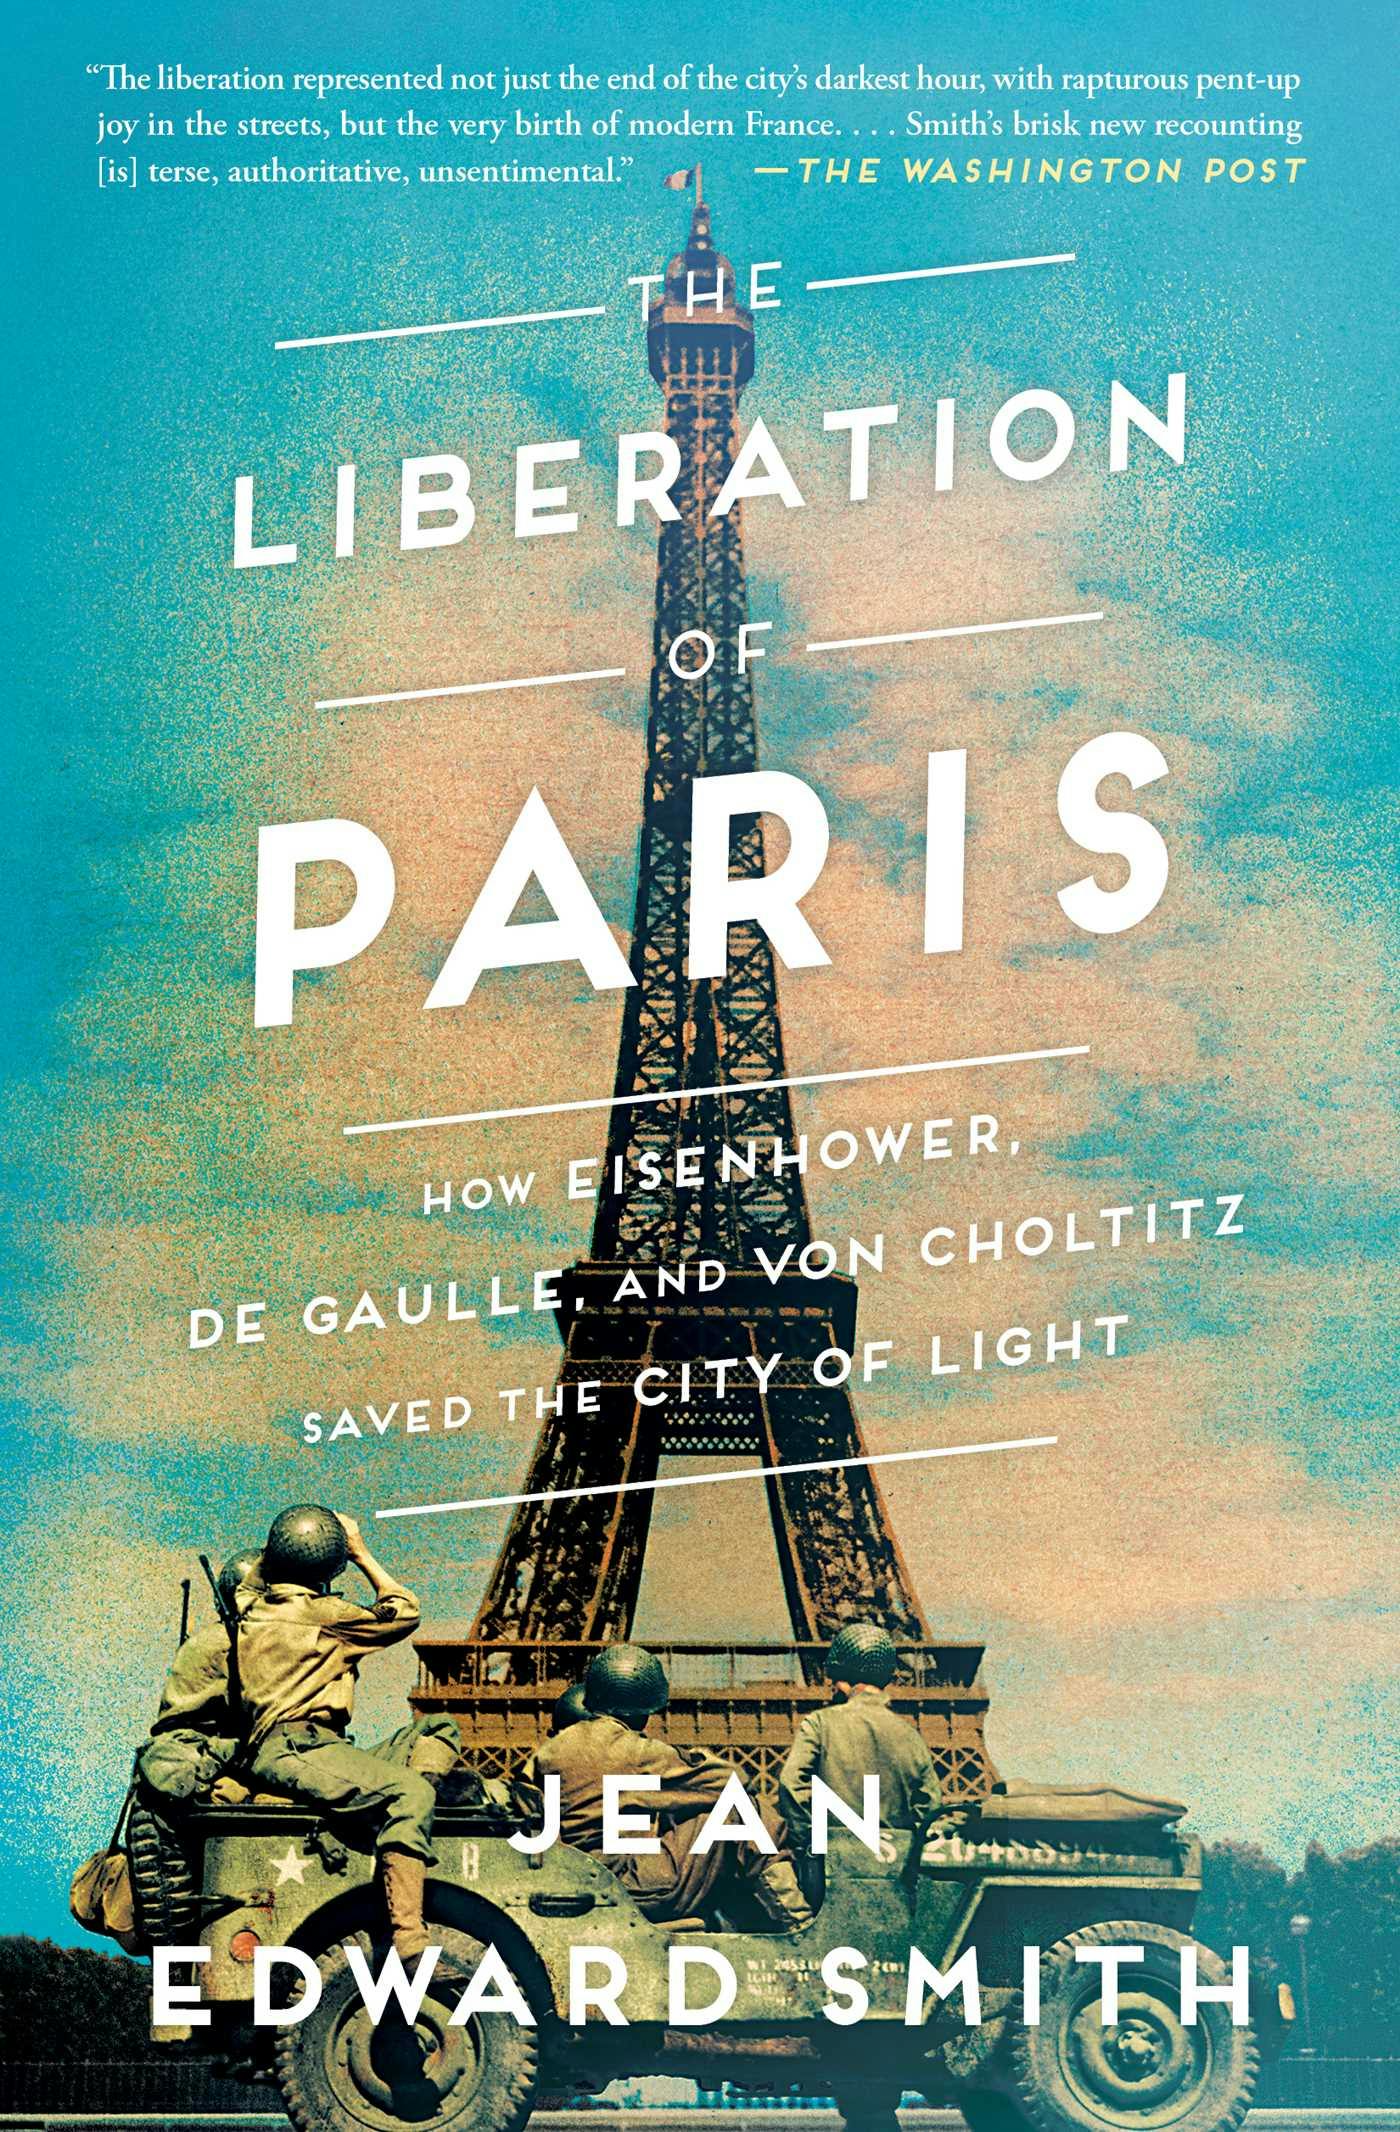 The Liberation of Paris: How Eisenhower, de Gaulle, and von Choltitz Saved the City of Light - Jean Edward Smith